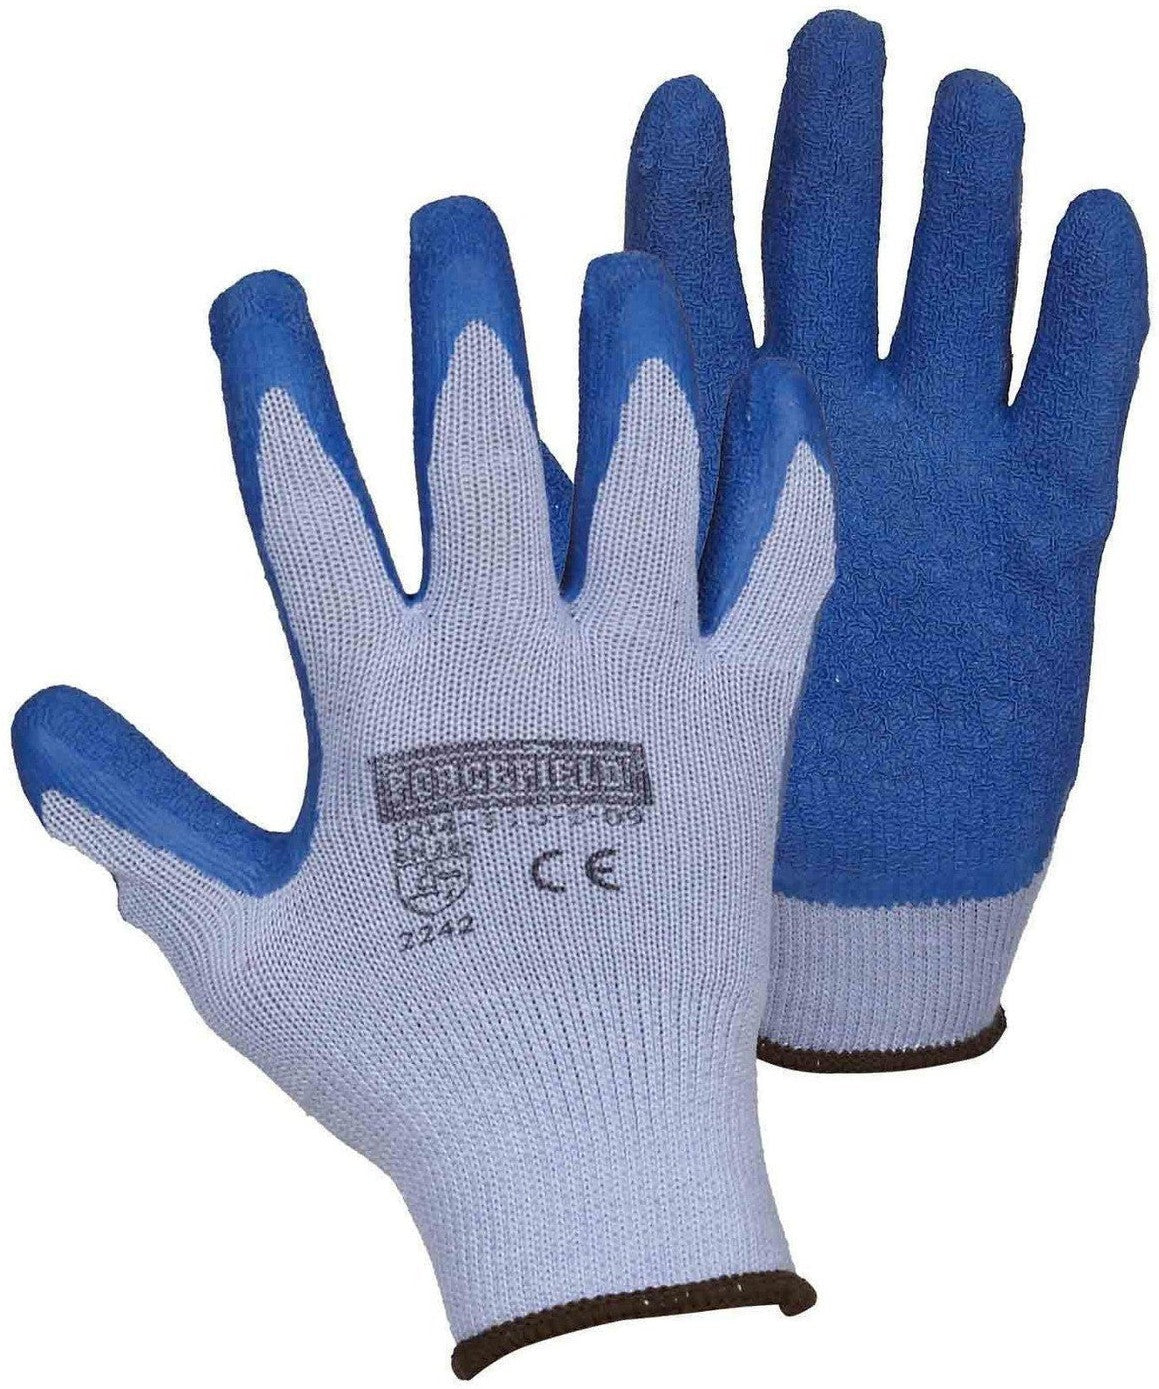 Forcefield - Size 9 Latex Palm Coated With Blue Crinkle String Knit Work Gloves - 004-310-I-09